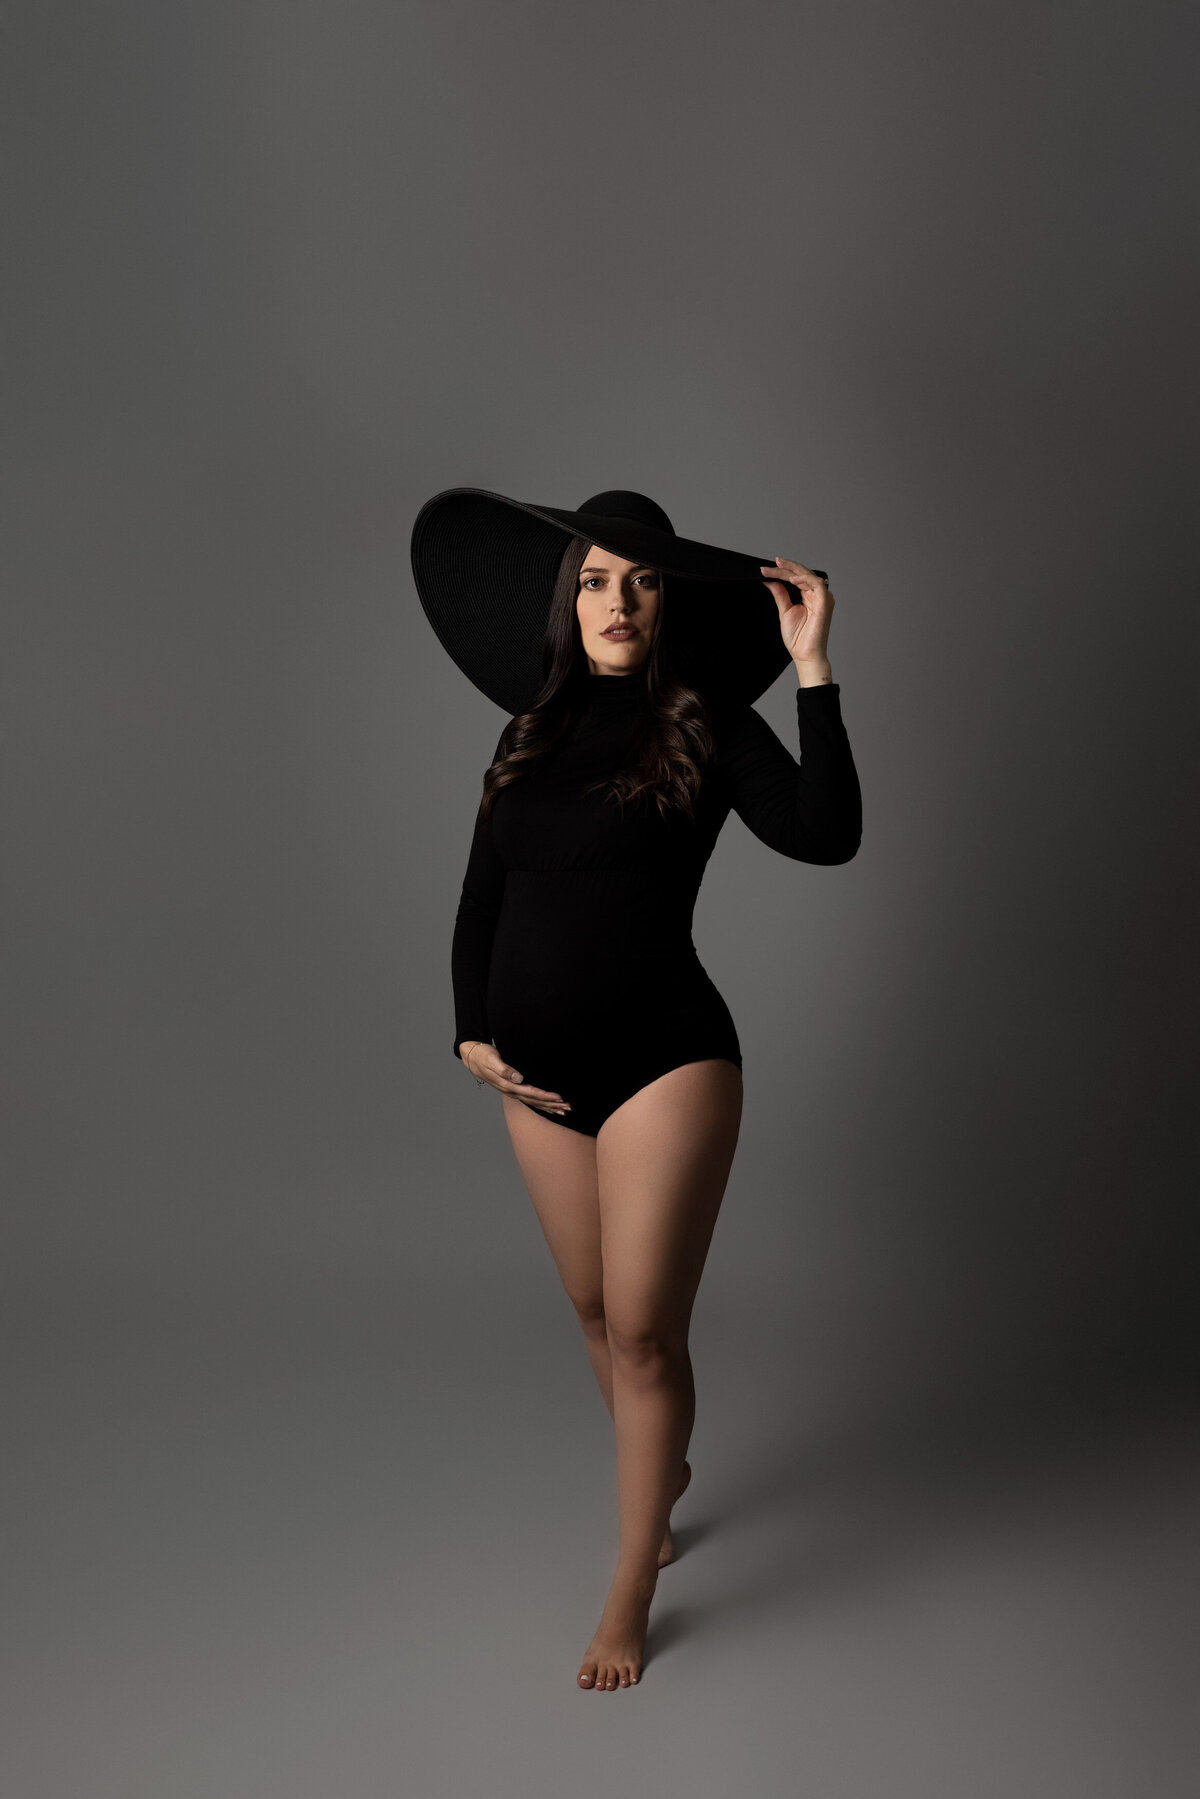 Studio maternity photoshoot in London, Ontario with an editorial vibe. Mom is wearing a black bodysuit and a black, wide-brimmed hat. One hand is resting under her bump, the other hand is touching her hat. She is gently tiptoeing toward the camera. Lots of negative space above mom.